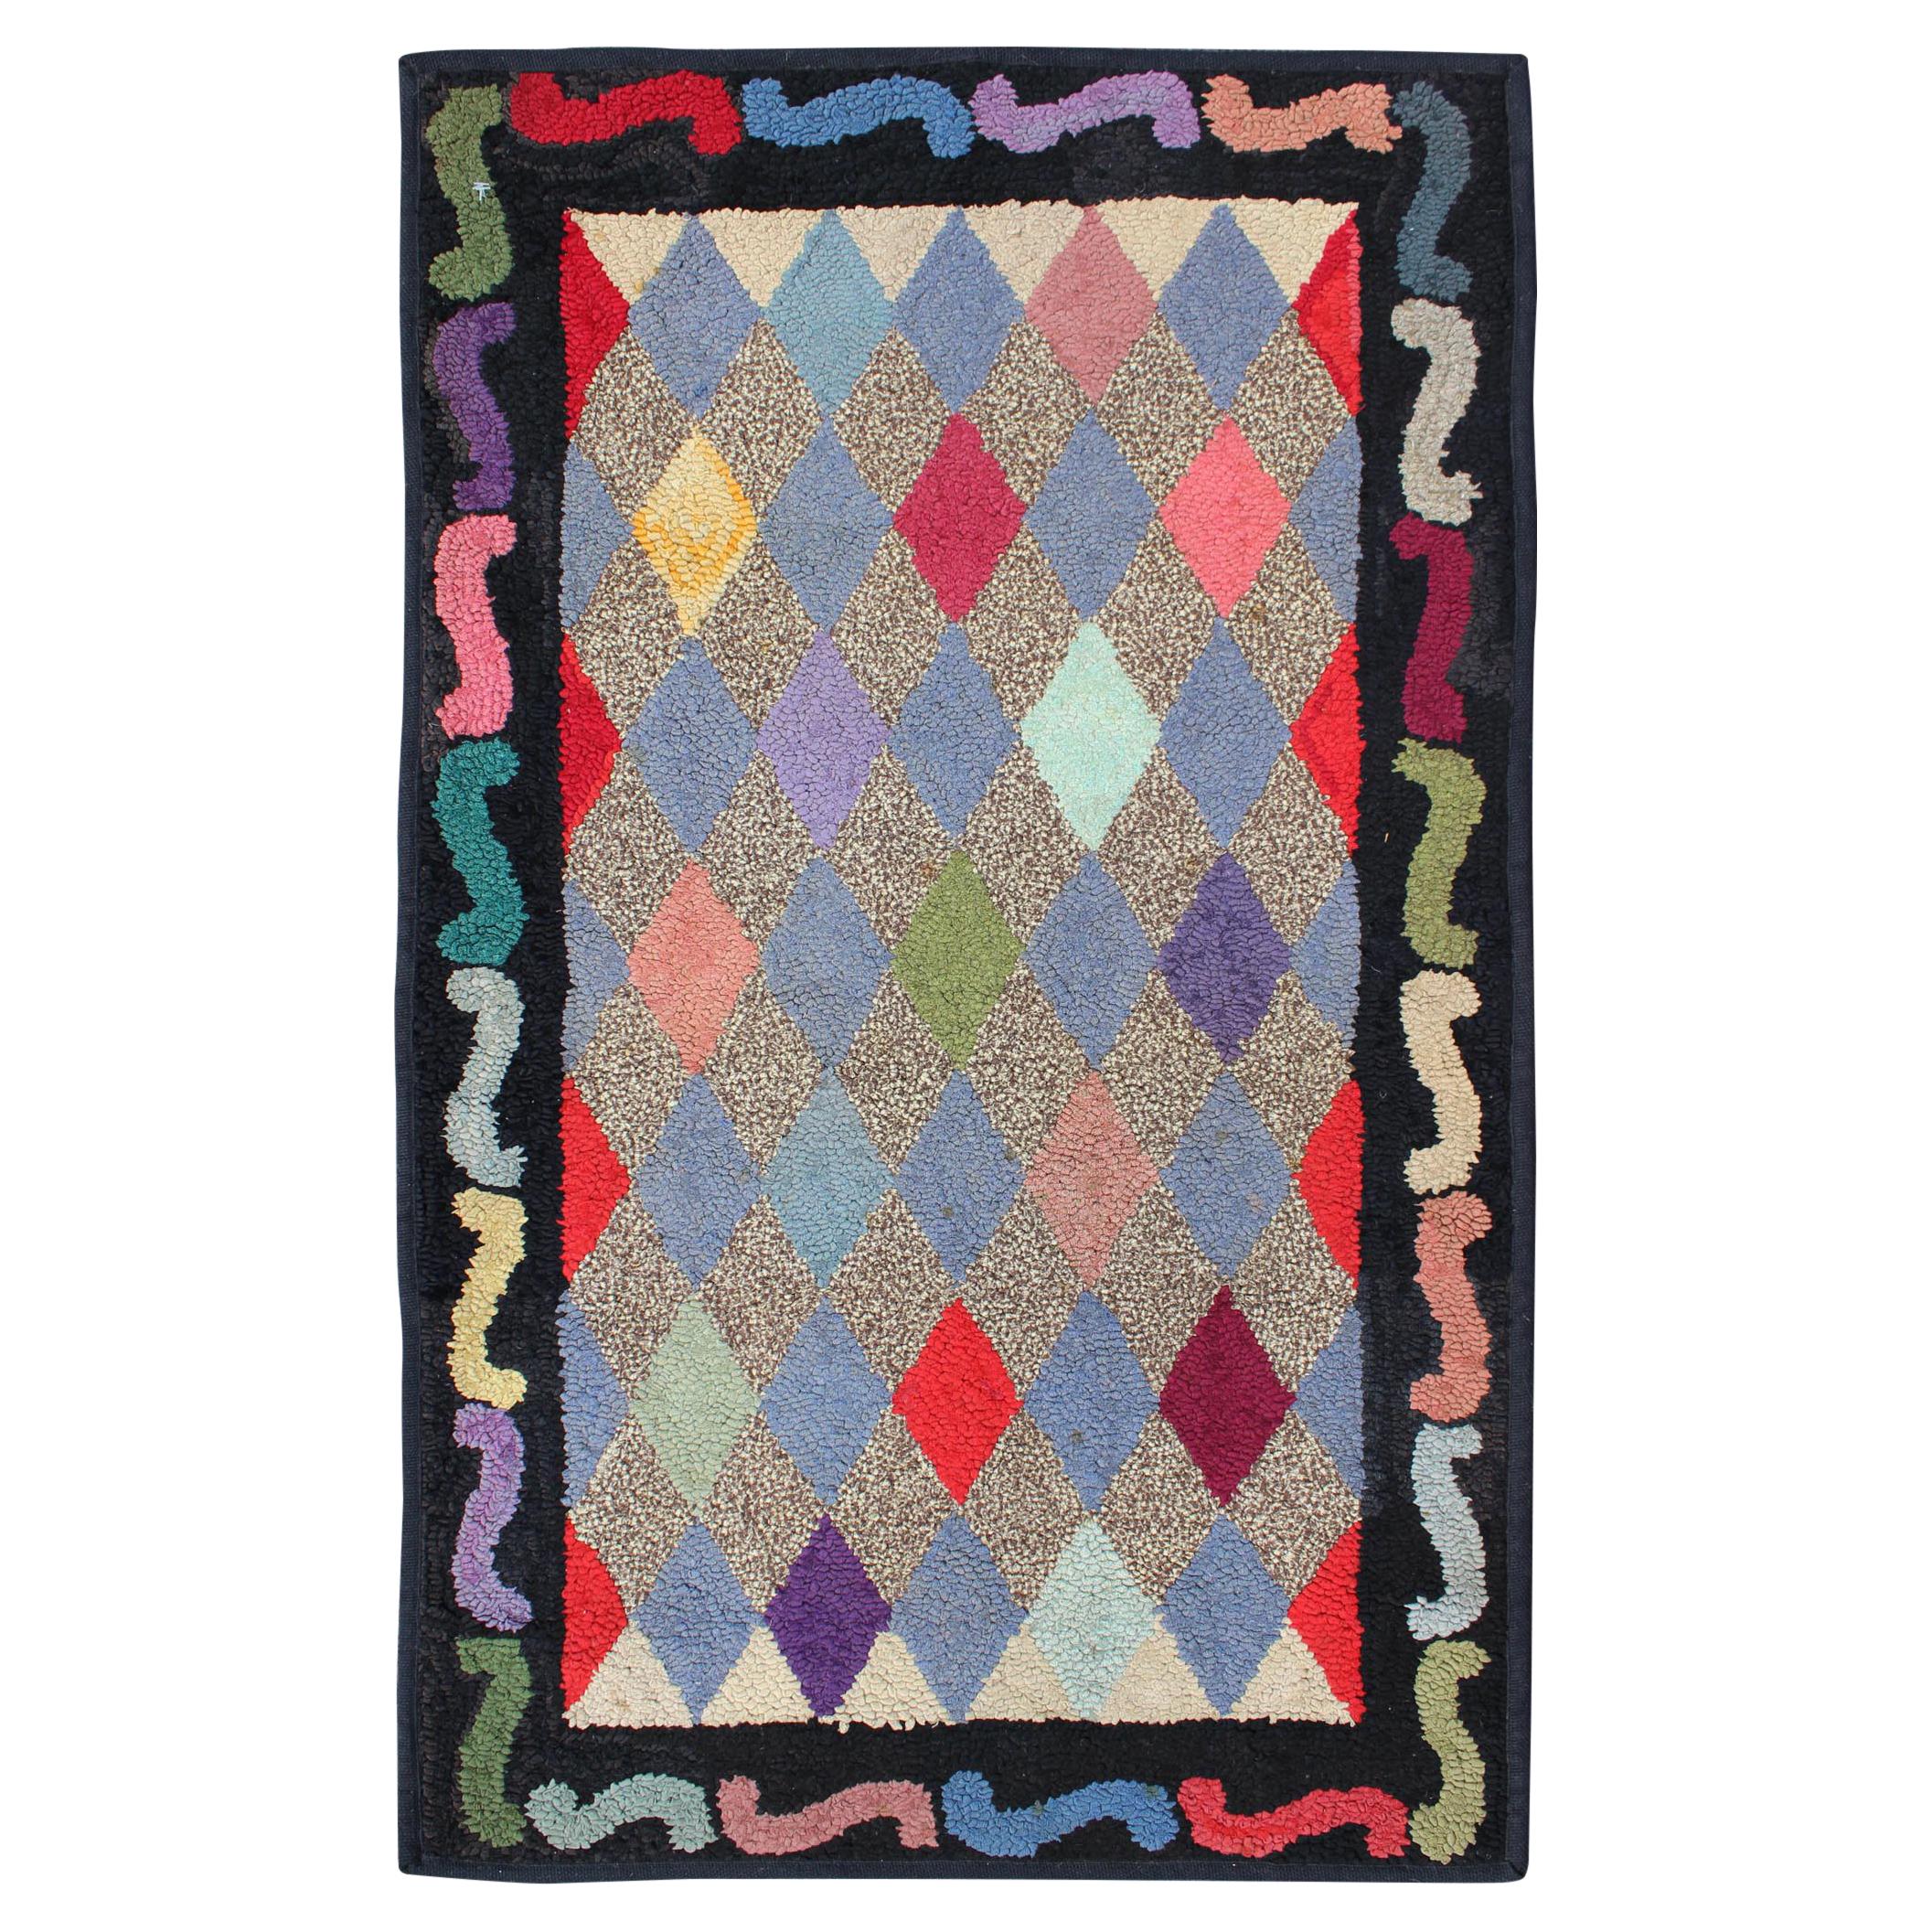 American Hooked Rug with Colorful All-Over Diamond Design with Charcoal Border